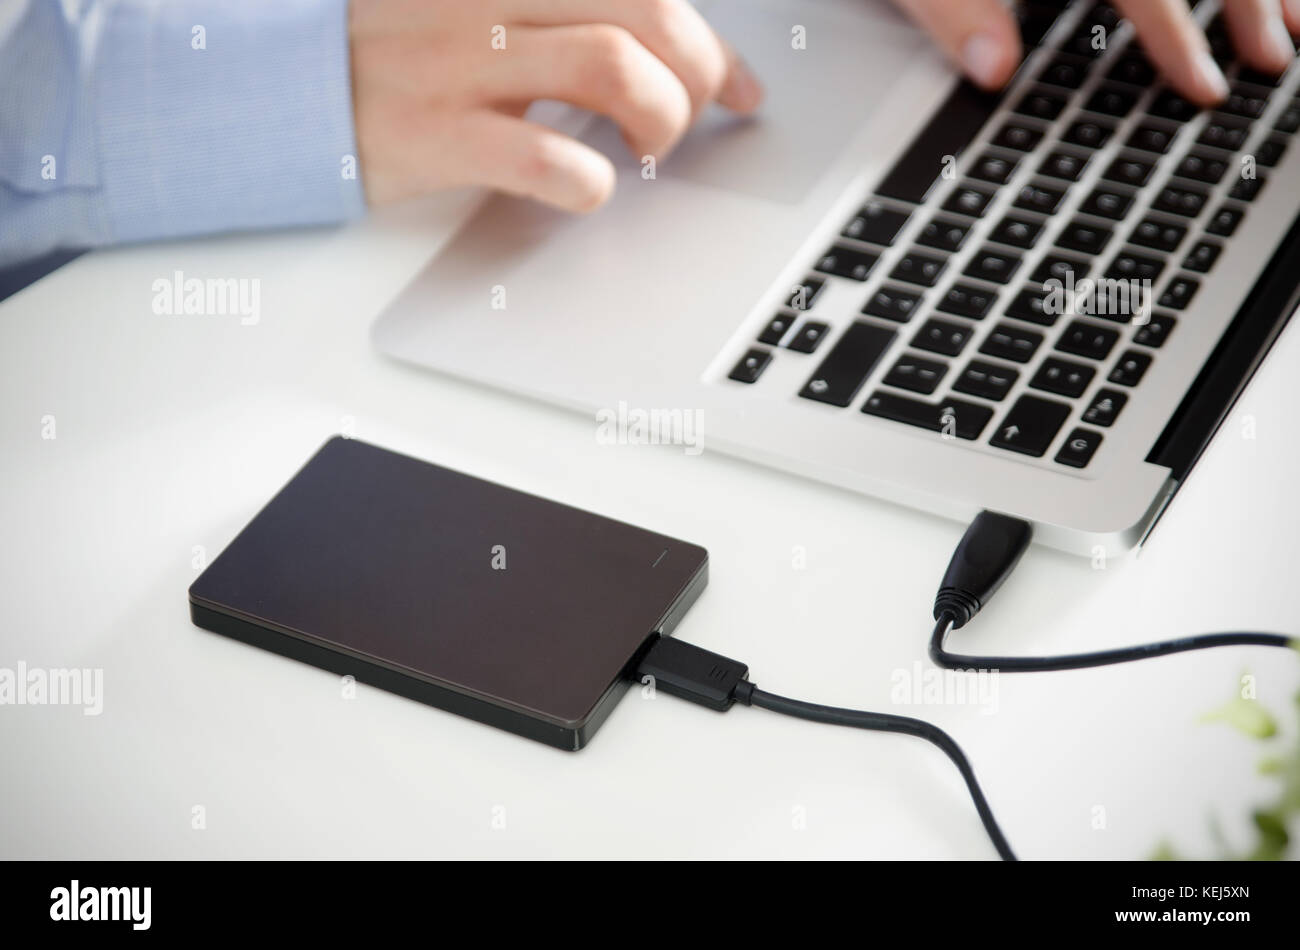 External backup disk hard drive connected to laptop. Man with notebook making safety personal data copy. Stock Photo